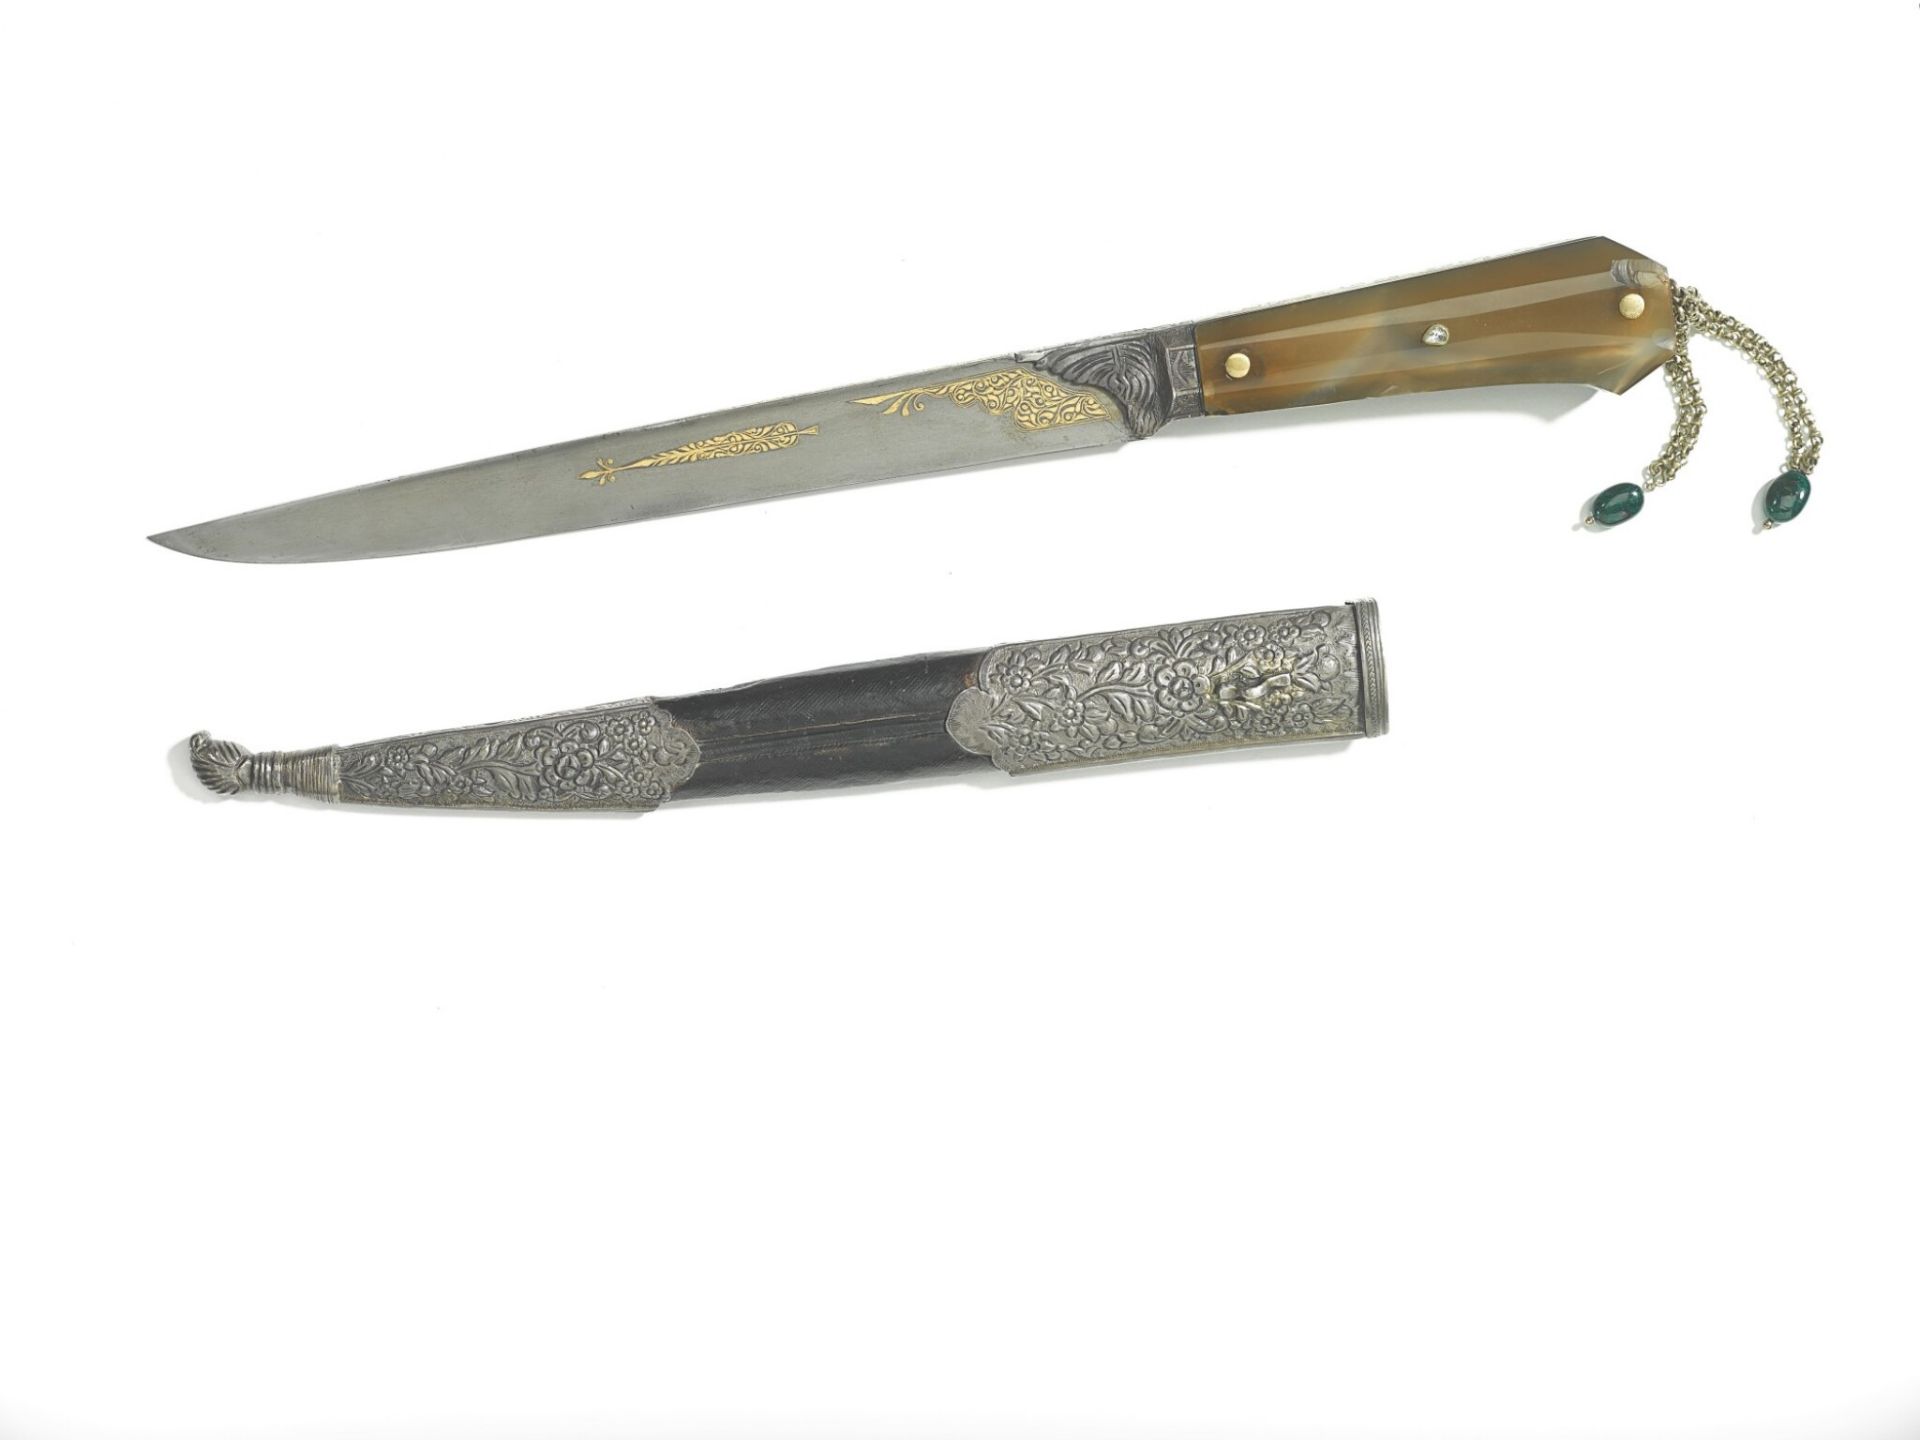 Ottoman agate-hilted dagger with scabbard, Turkey, late 18th/19th century - Image 4 of 4